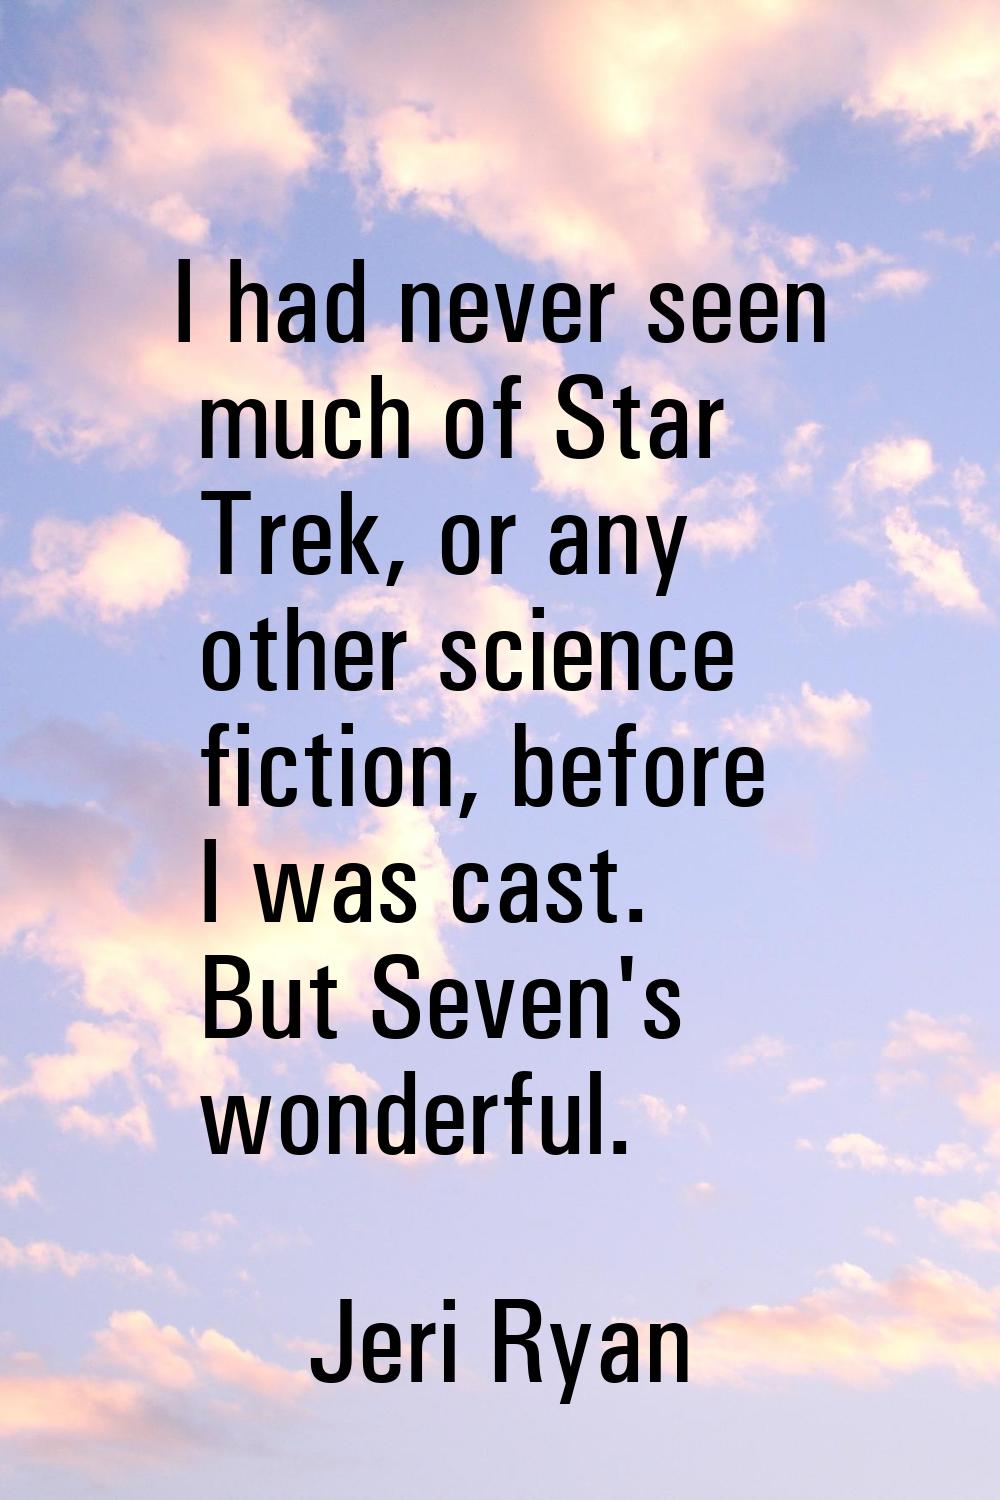 I had never seen much of Star Trek, or any other science fiction, before I was cast. But Seven's wo